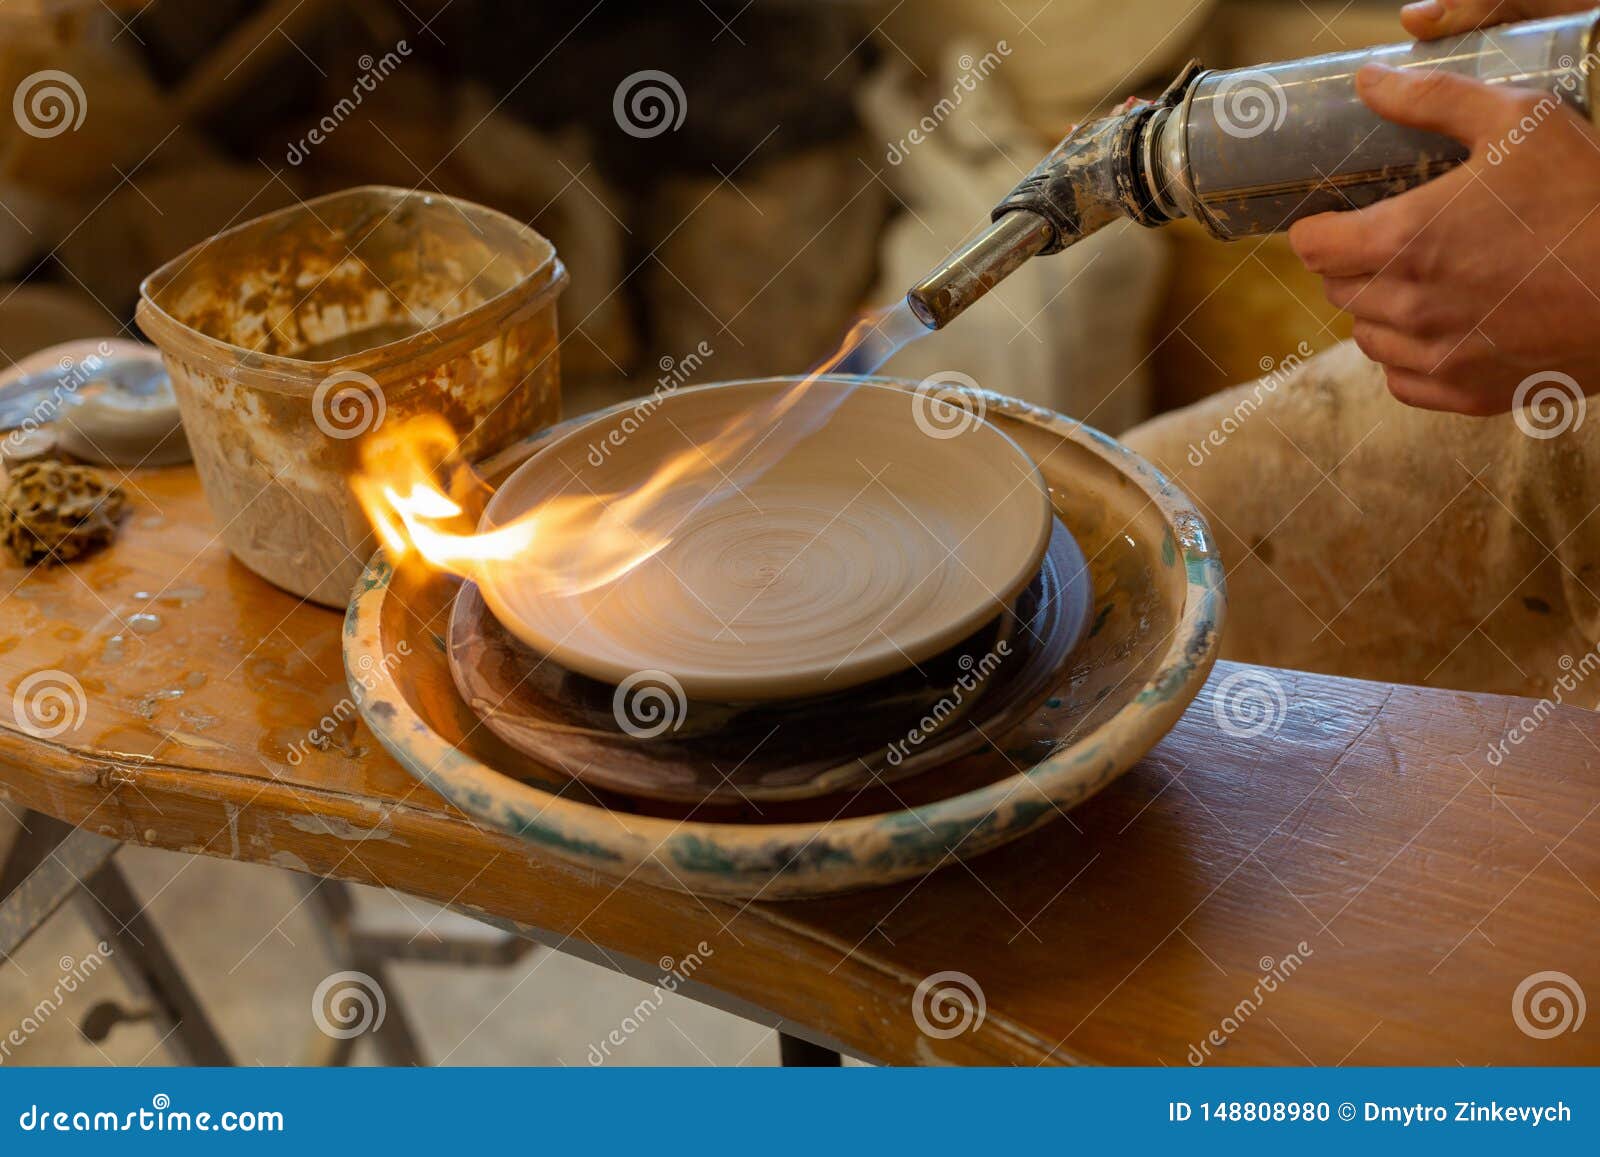 Pottery Master Baking Clay Plate with Special Apparat Stock Photo - Image  of apron, baking: 148808980